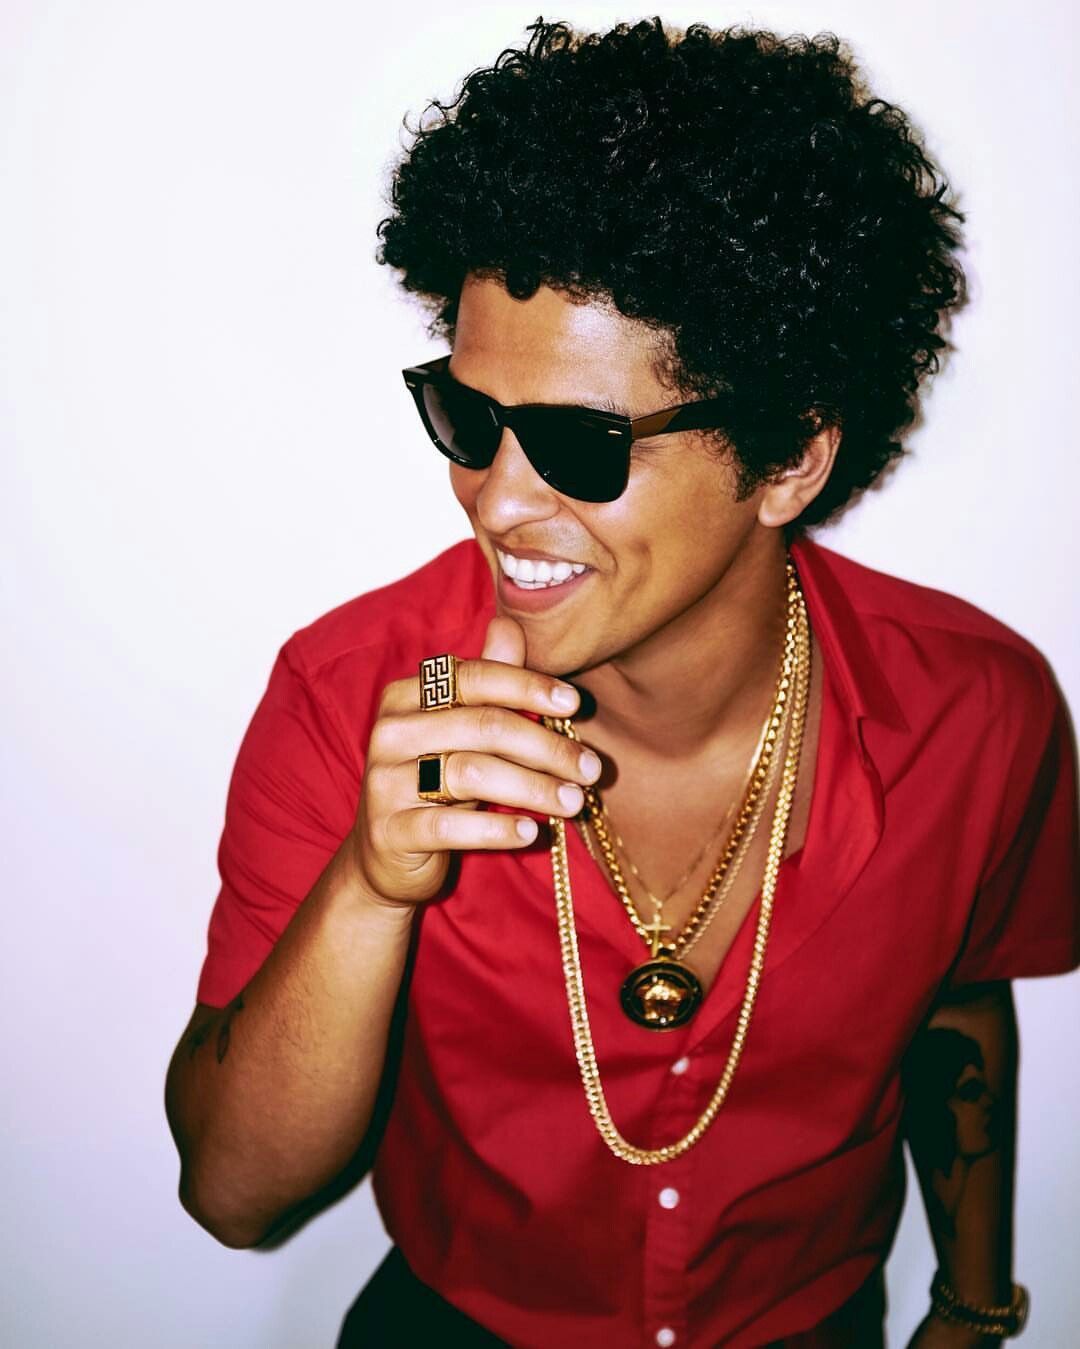 A man in sunglasses and red shirt holding his phone - Bruno Mars